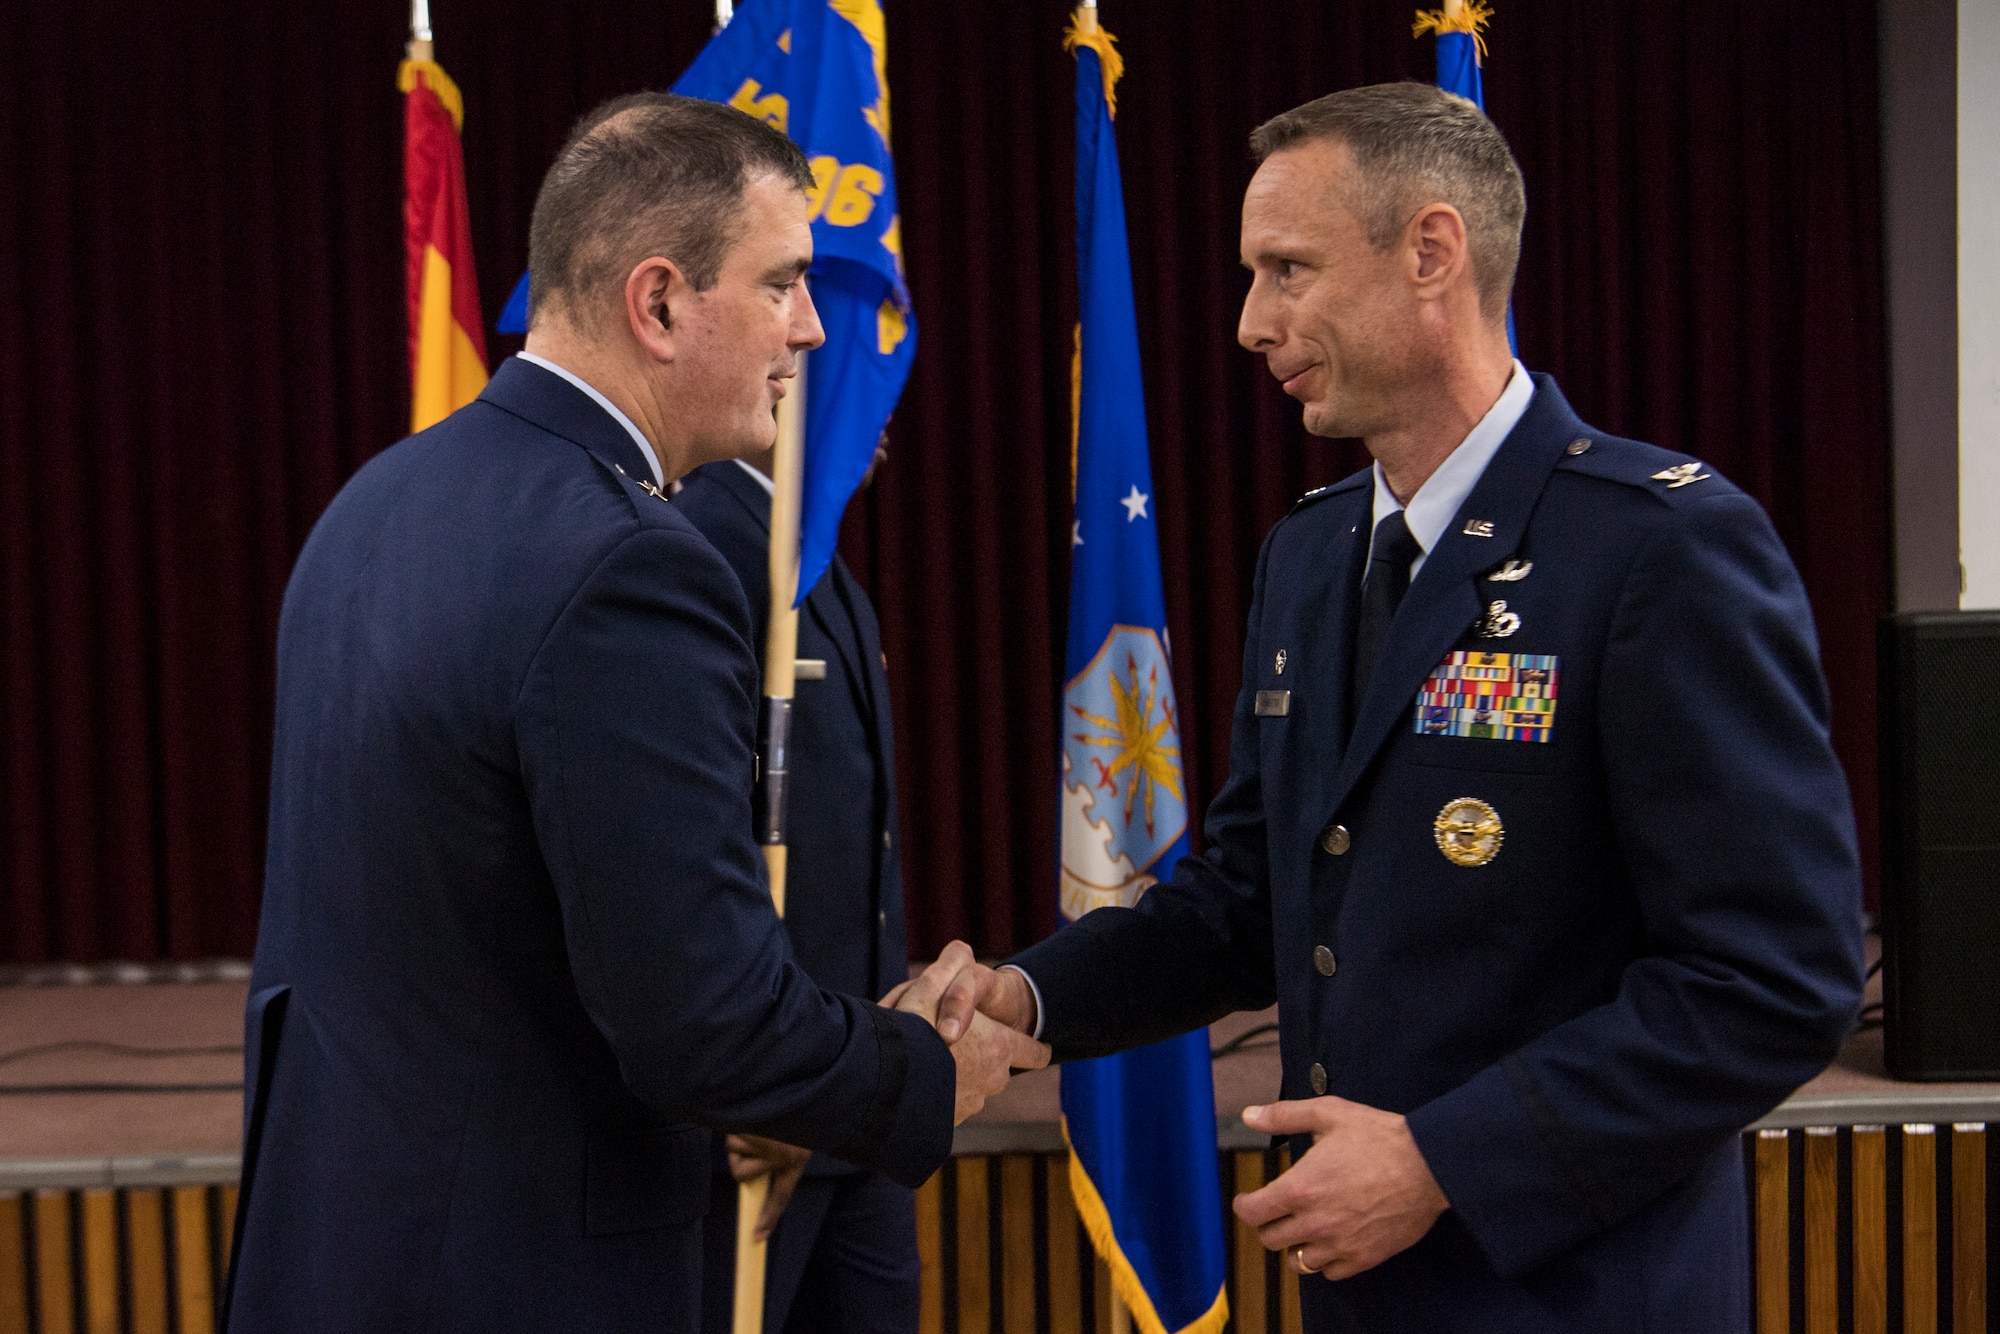 The 496th Air Base Squadron, Morón Air Base, Spain, was realigned from under the 86th Operations Group, Ramstein Air Base, Germany, to the 65th Air Base Group, Lajes Field, Portugal, 1 April, 2019 on Morón Air Base, Spain.